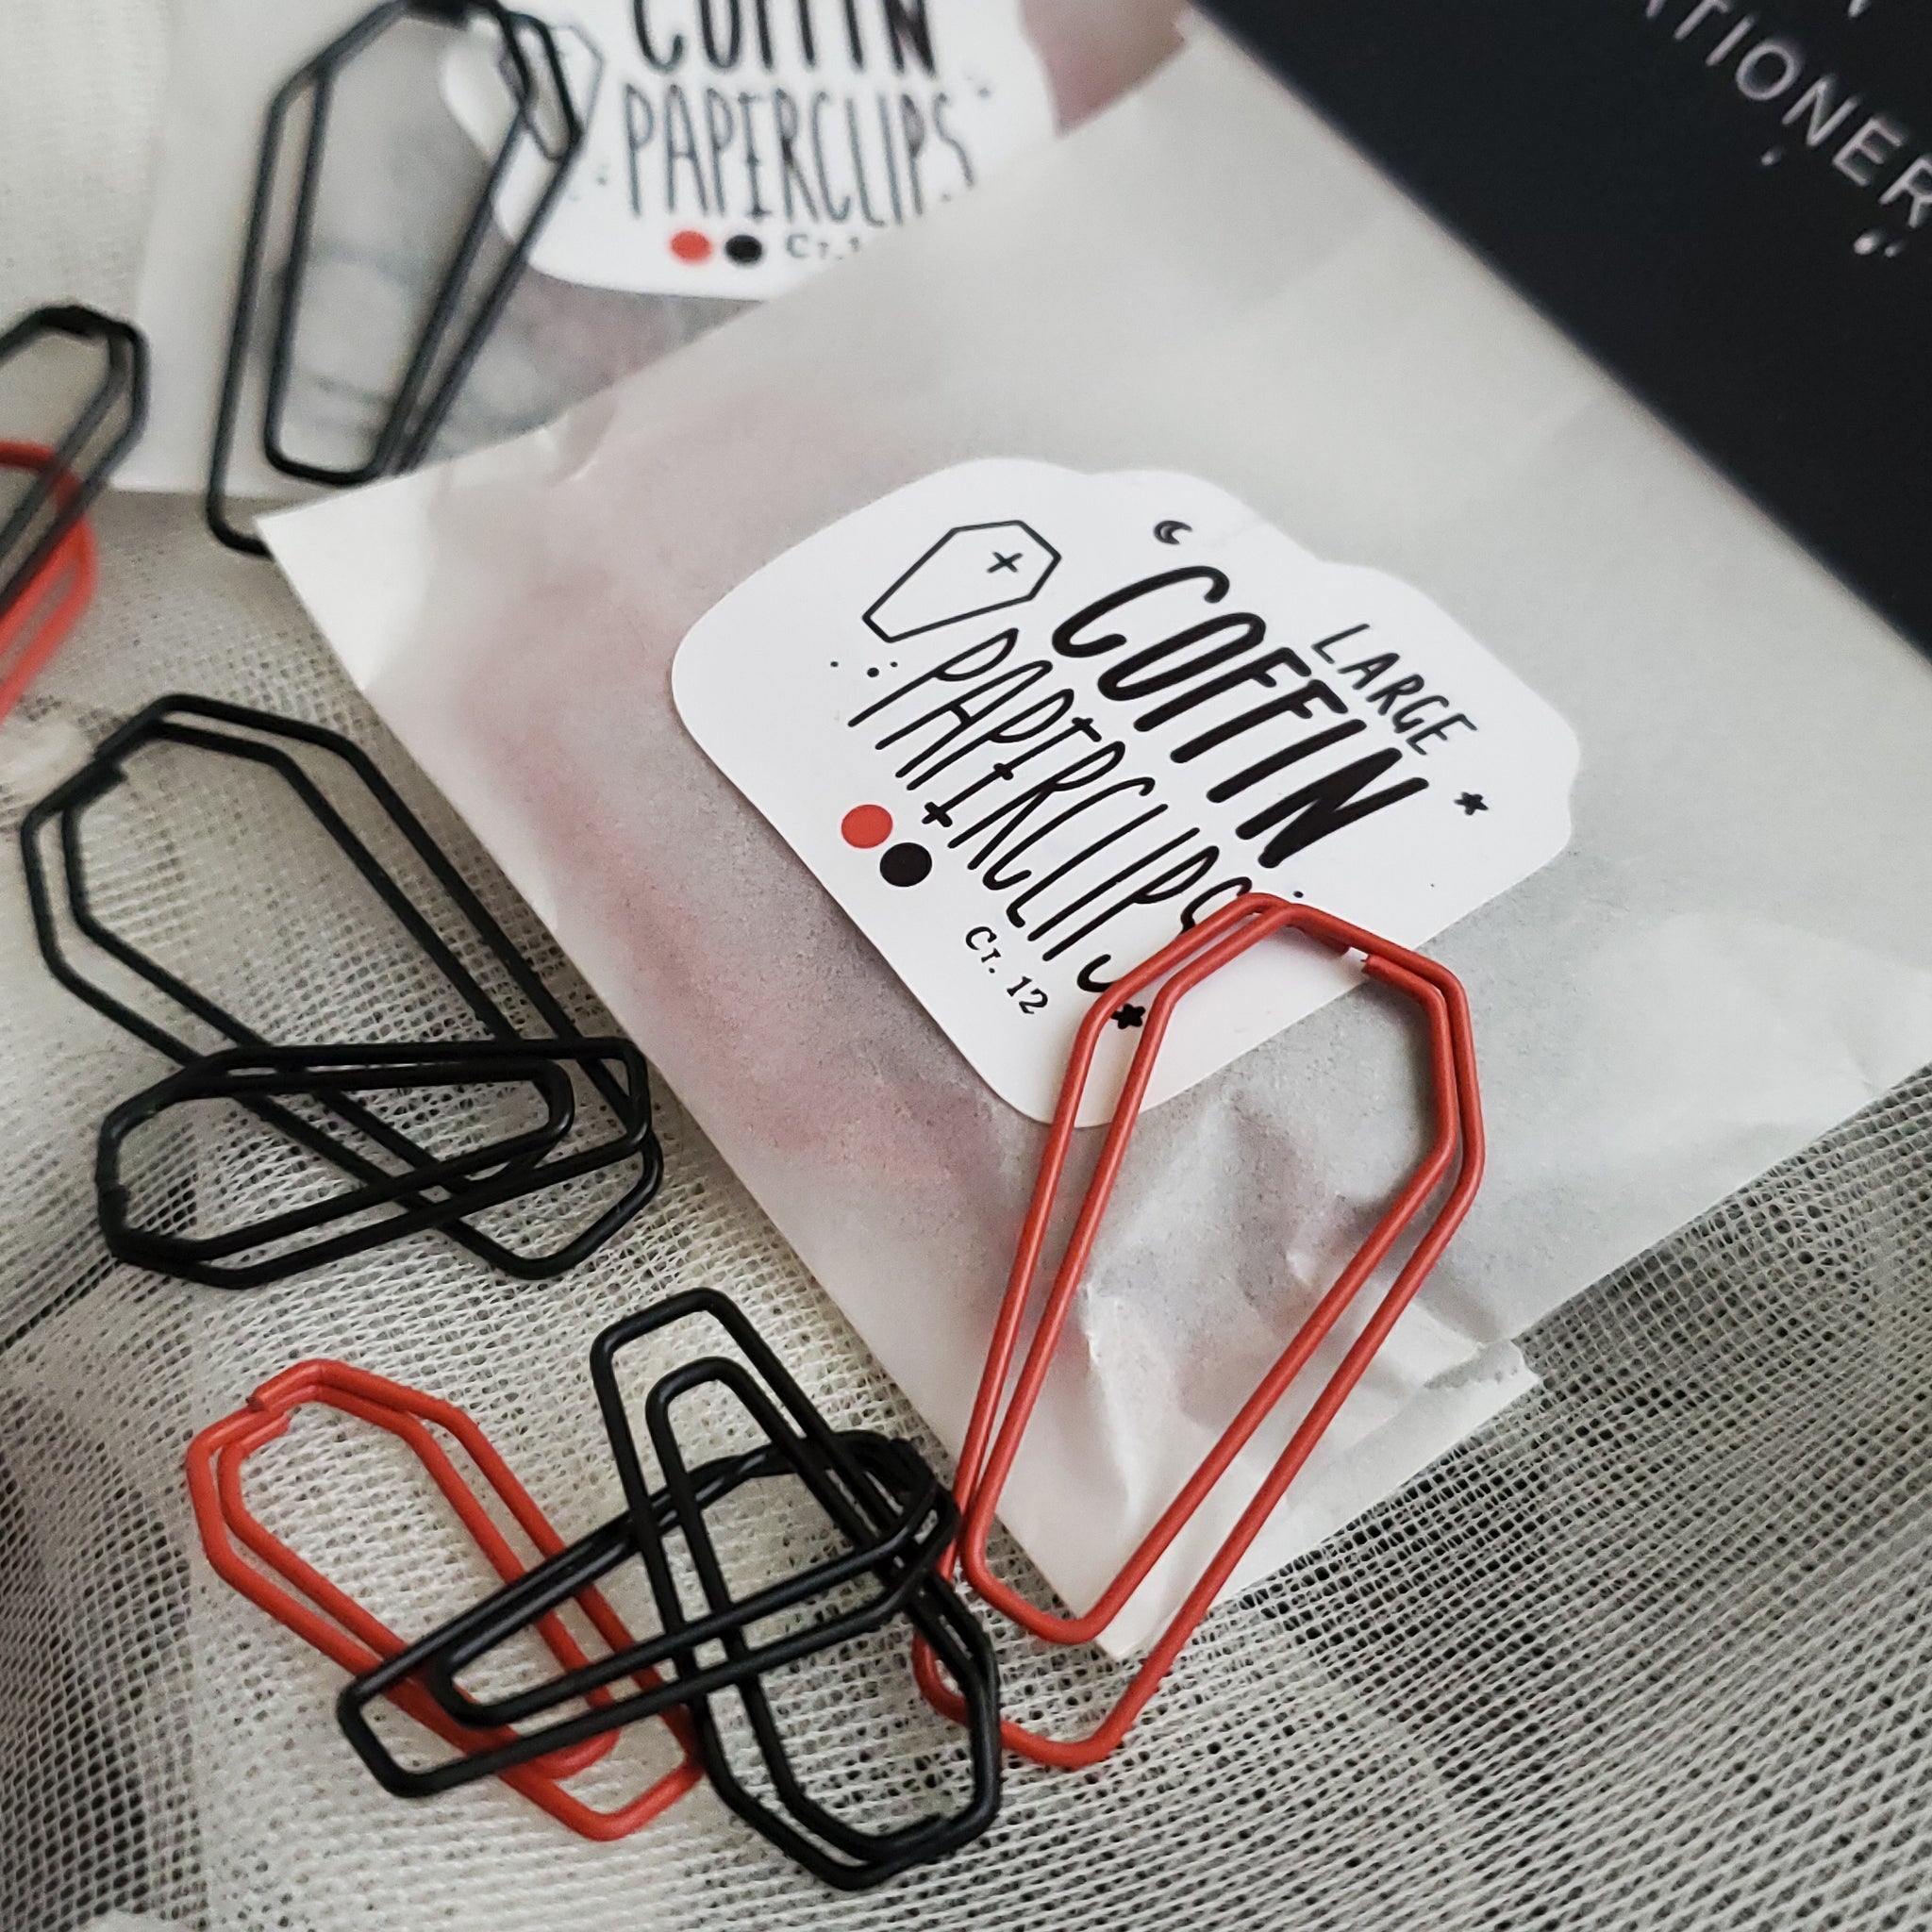 Red and Black Coffin paperclips